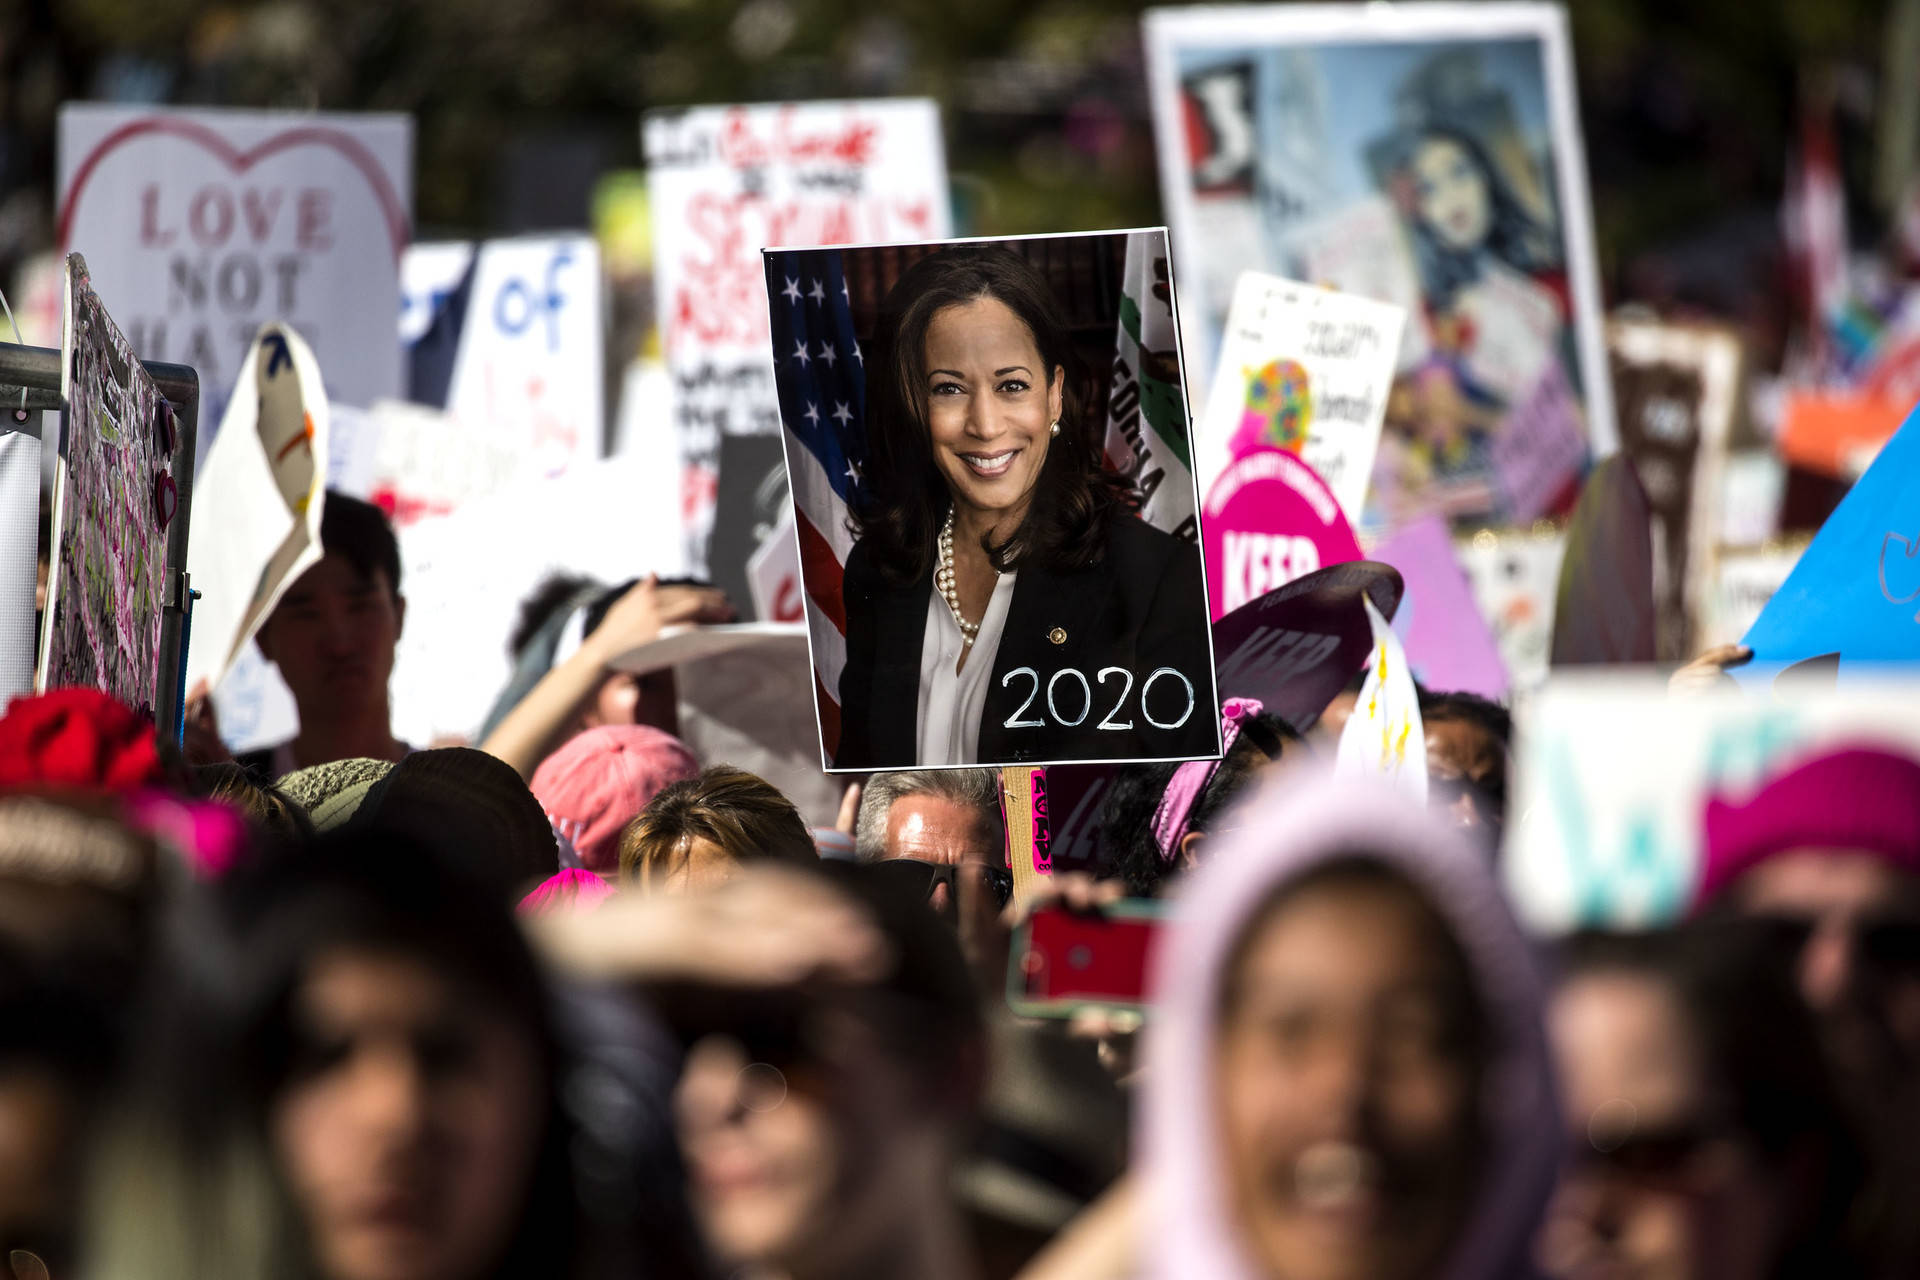 A person holds a poster of California U.S. Sen. Kamala Harris with '2020' written on it at the Women's March in Los Angeles on Jan. 19, 2019. Harris announced her candidacy for president on Monday, January 21, 2019. Barbara Davidson/Getty Images